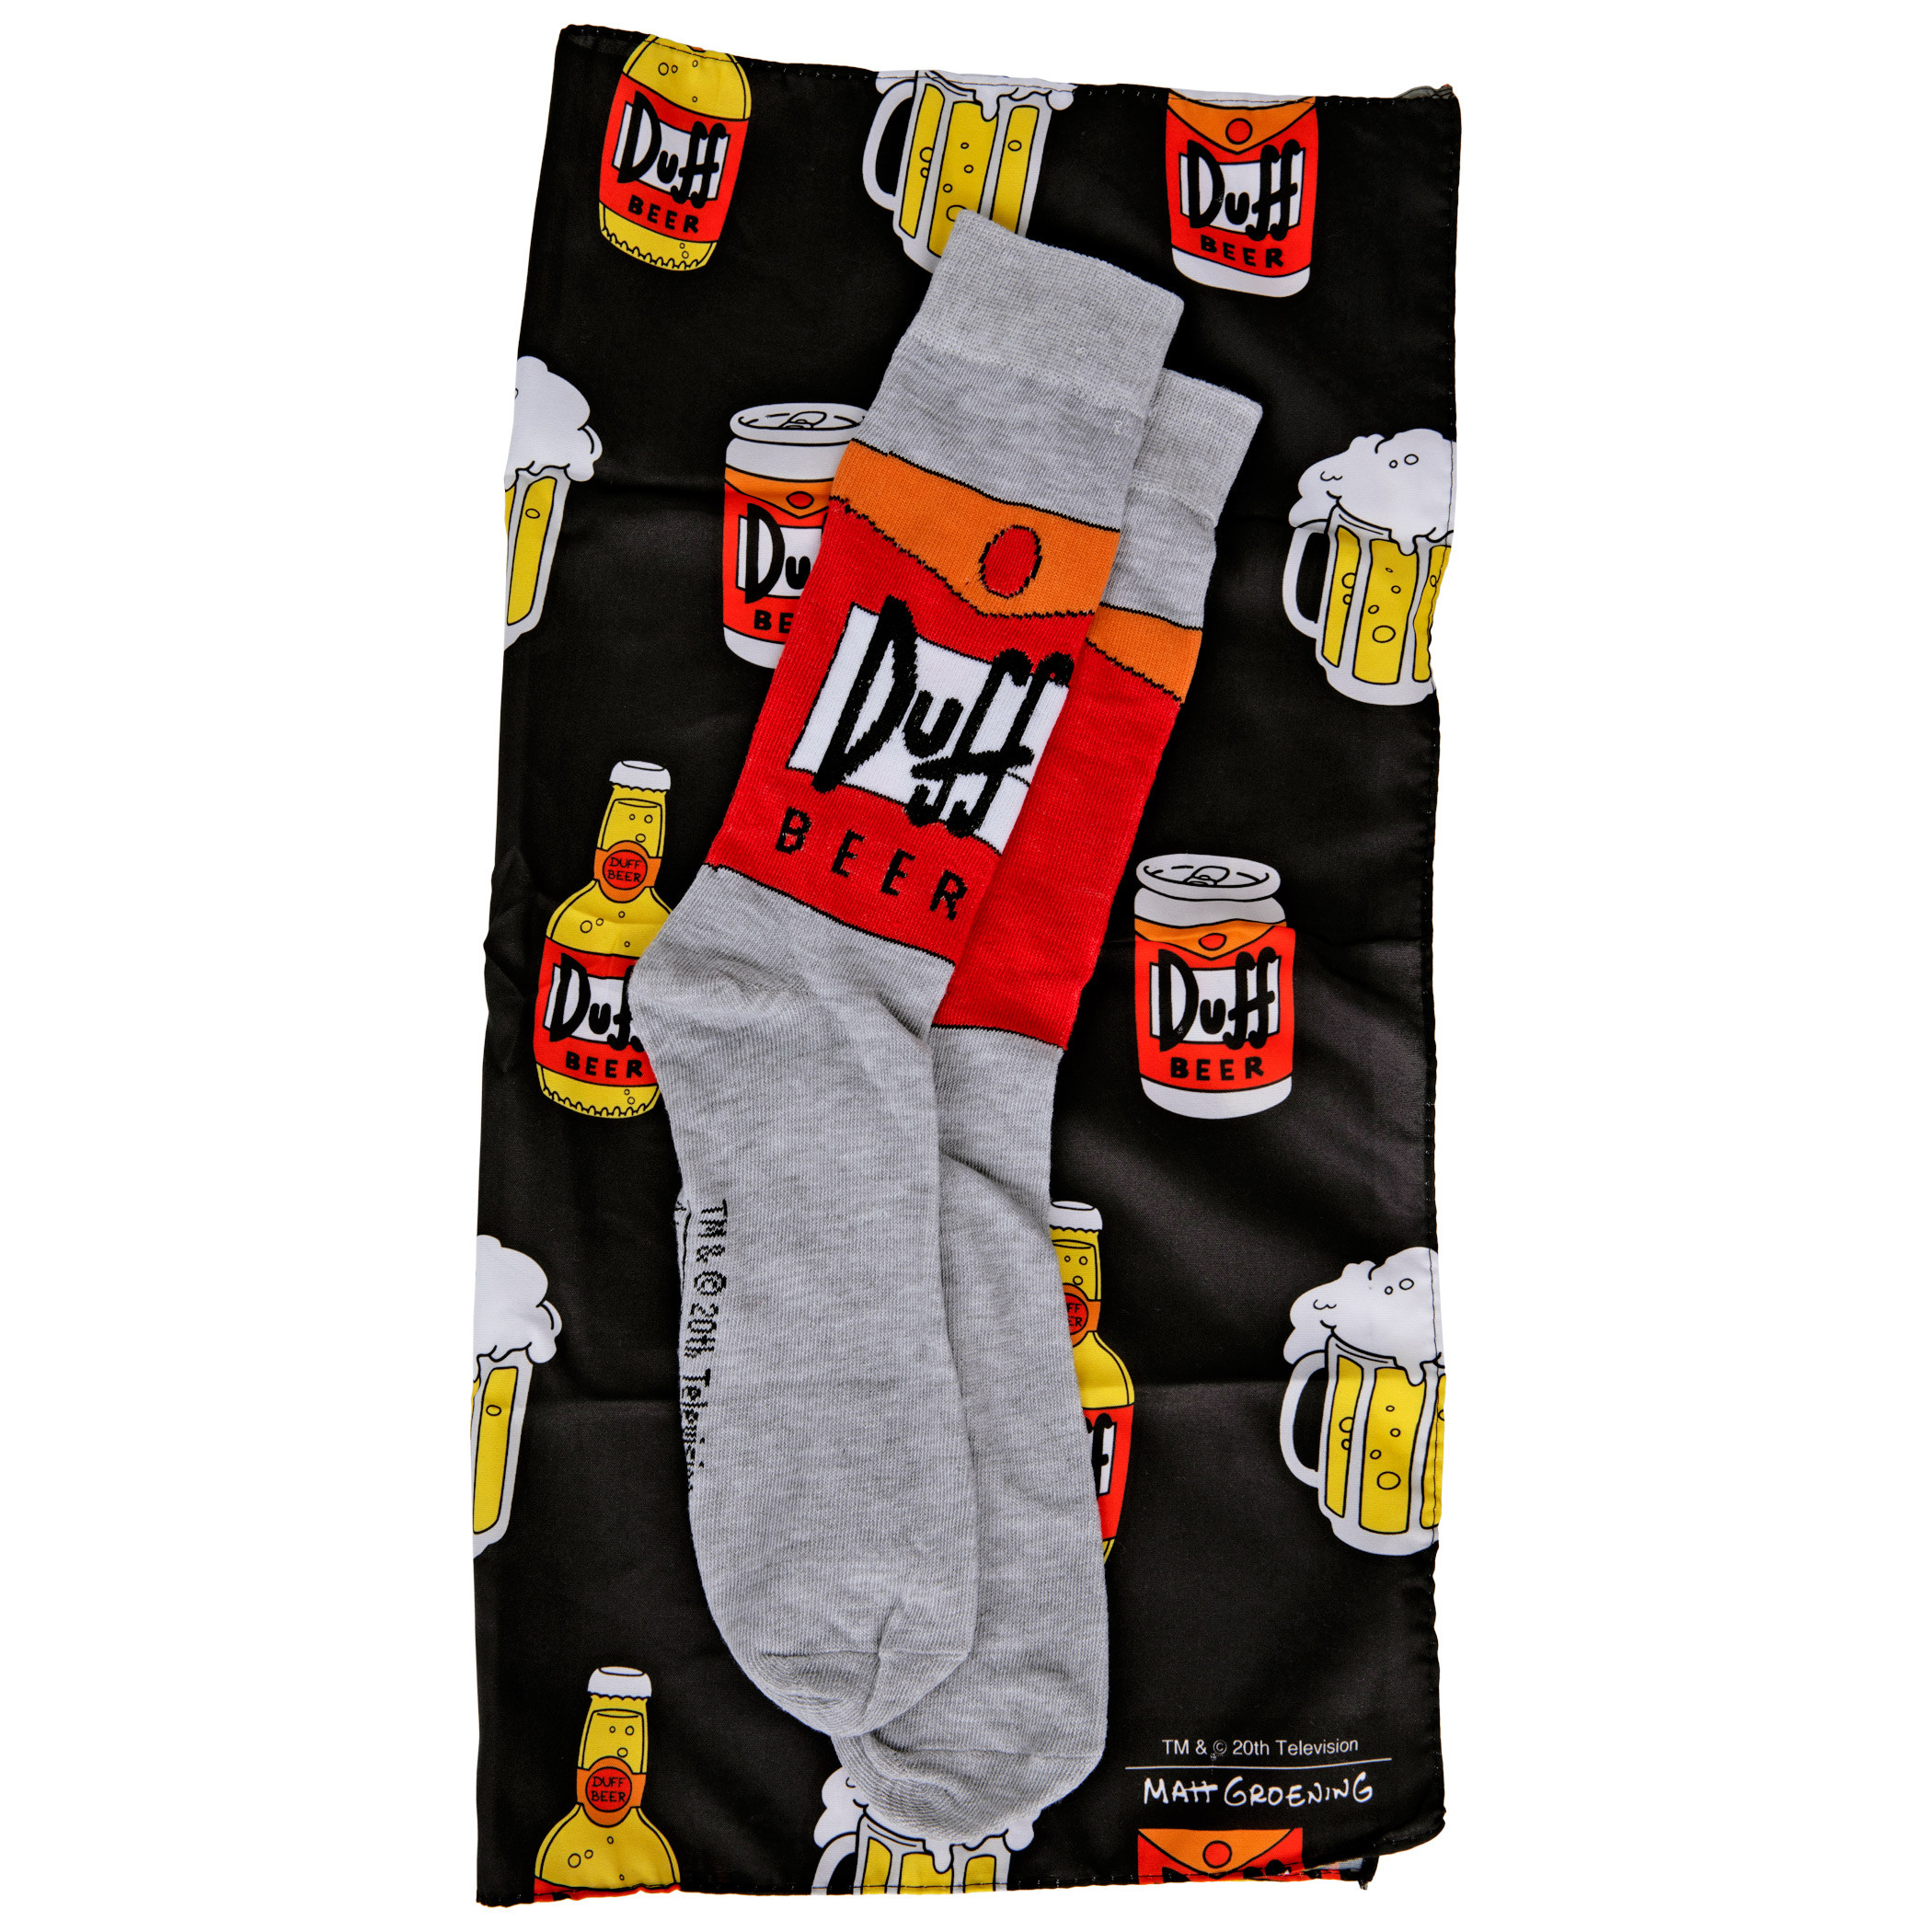 The Simpsons Duff Beer Crew Sock and Face Mask Combo